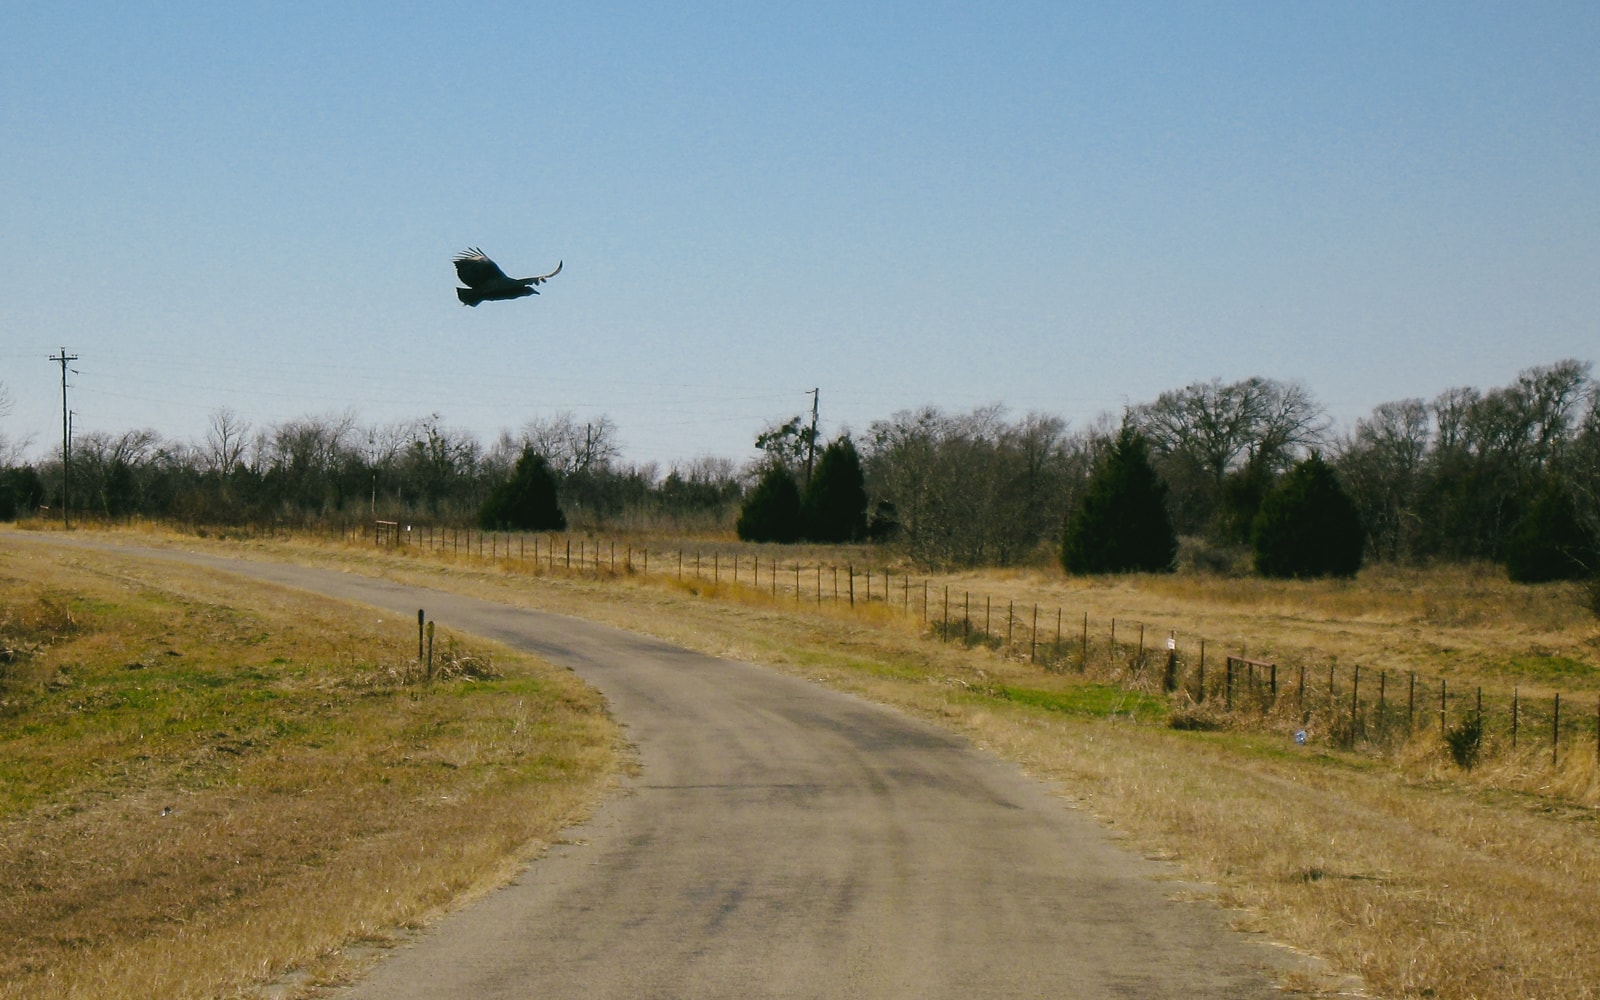 A bird flying over a country road